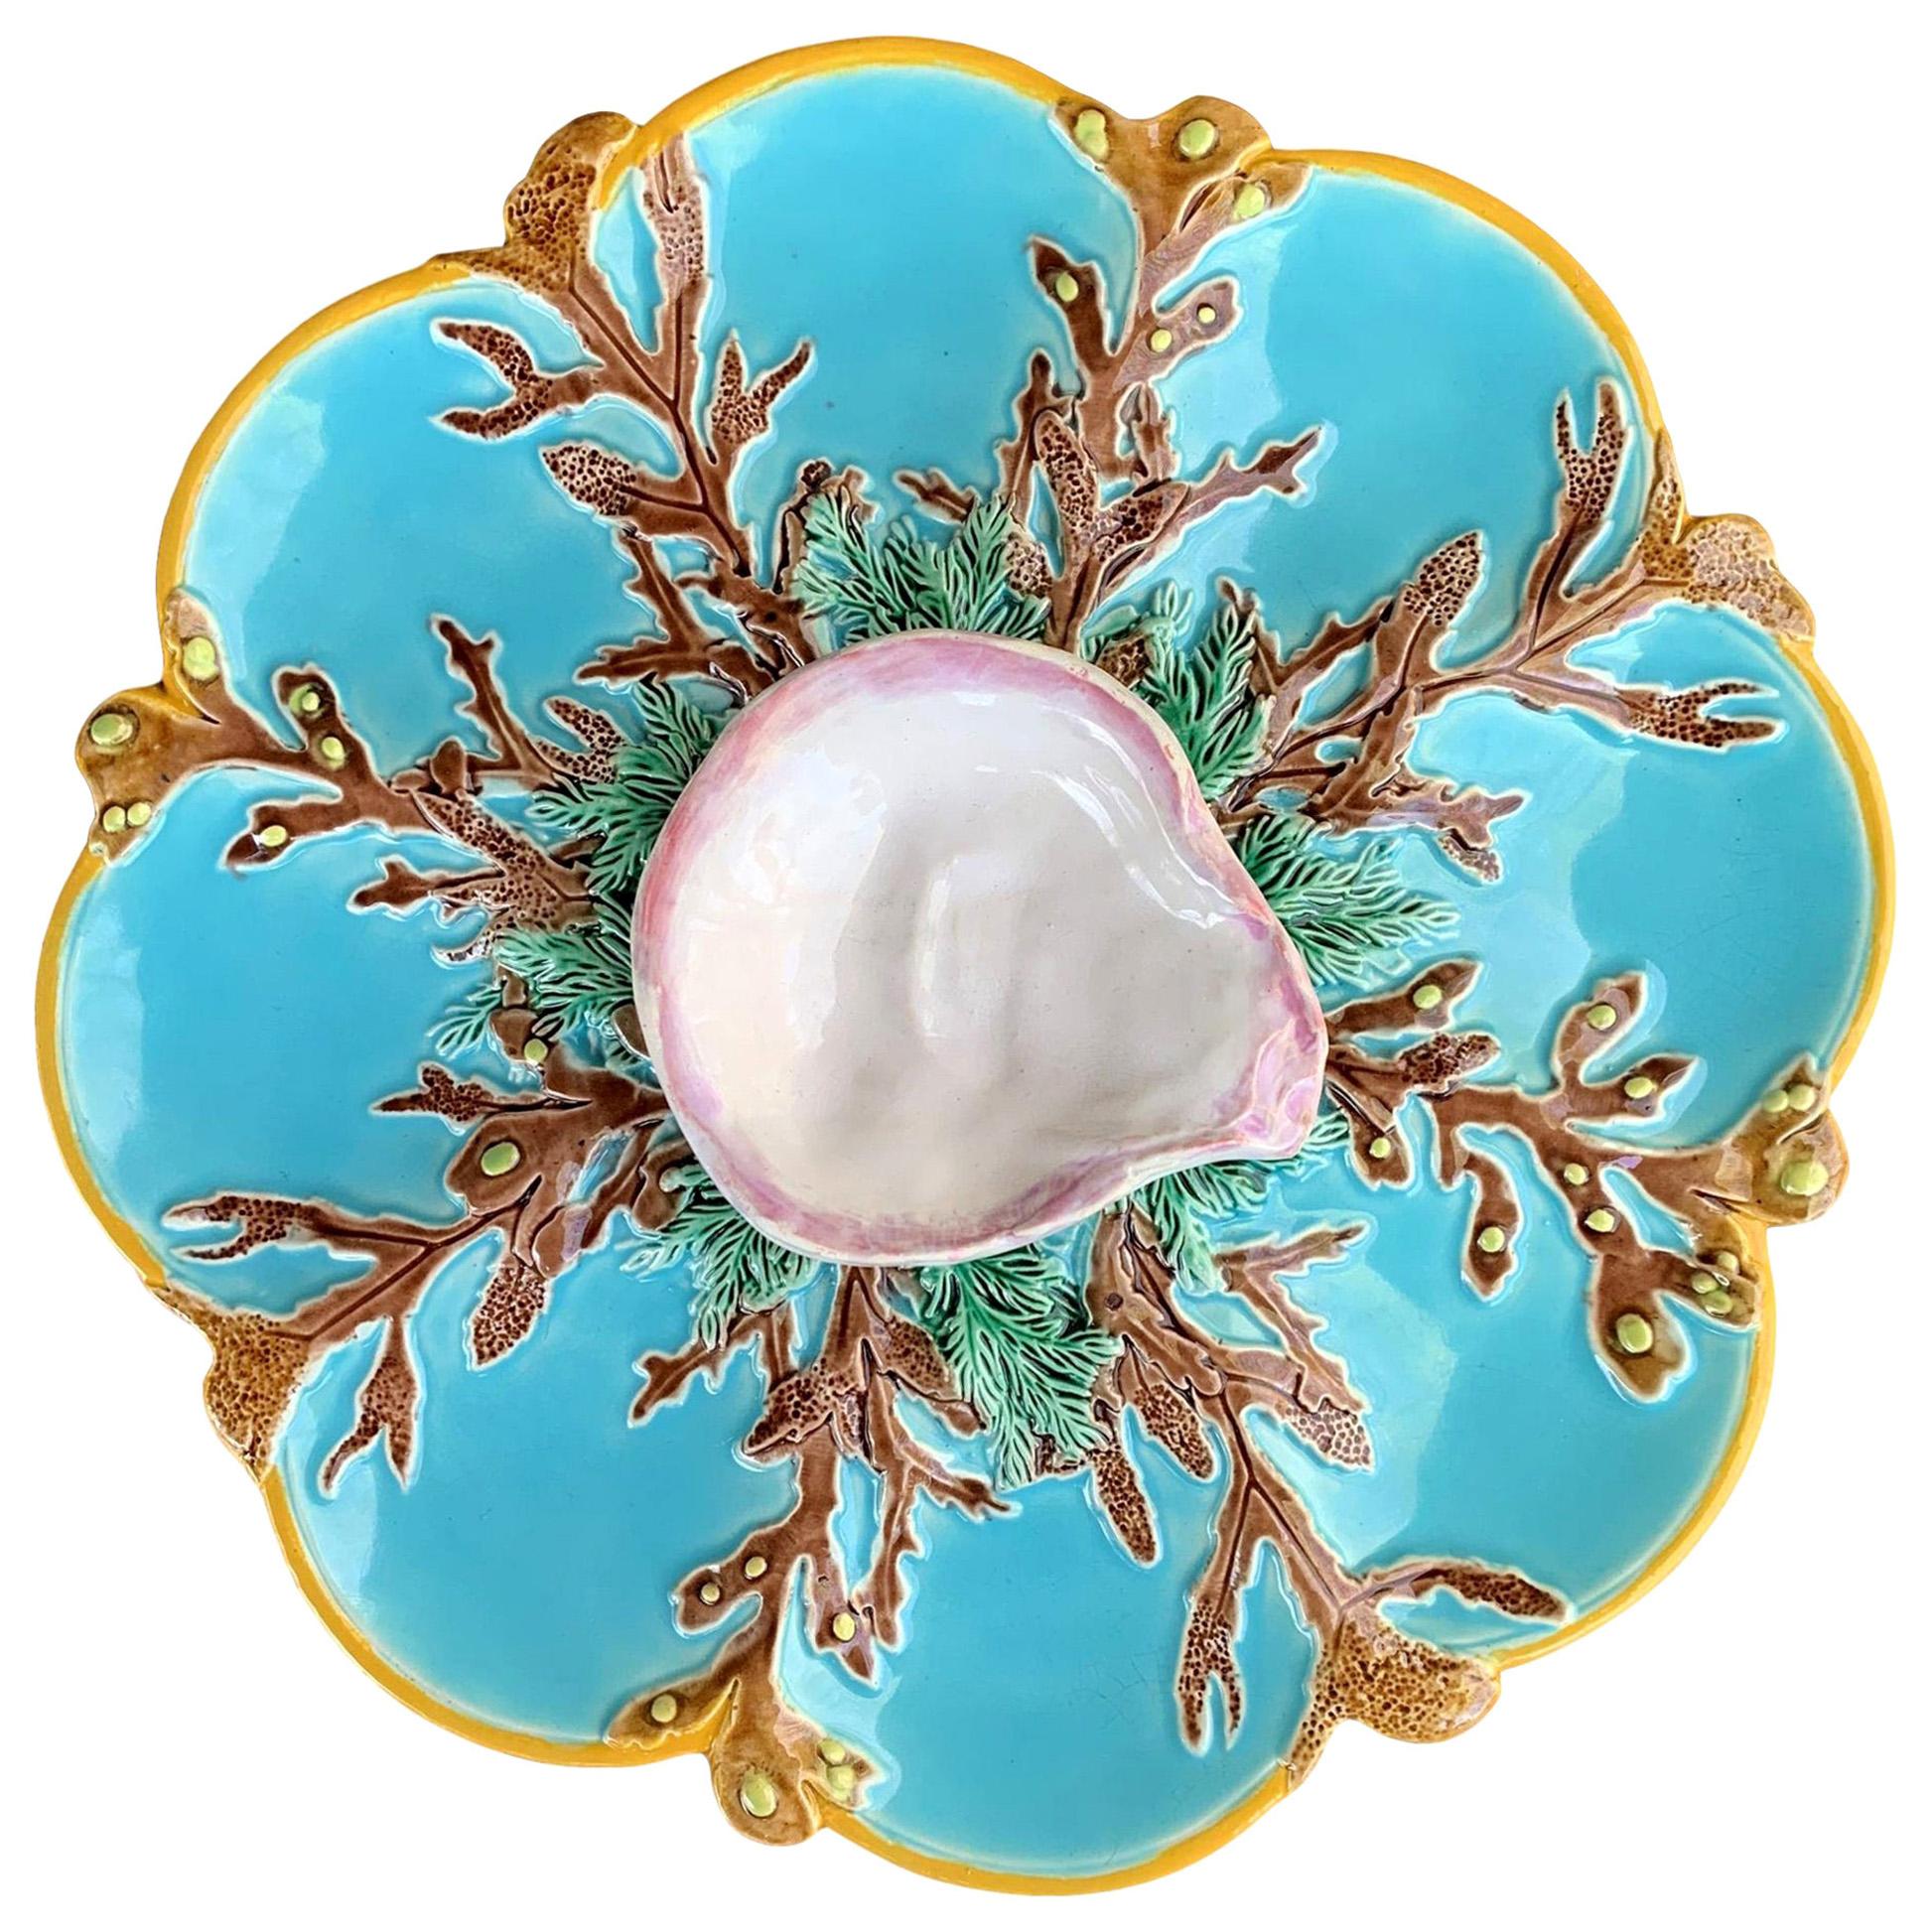 George Jones Majolica Turquoise Eight Well Oyster Plate, English, circa 1874